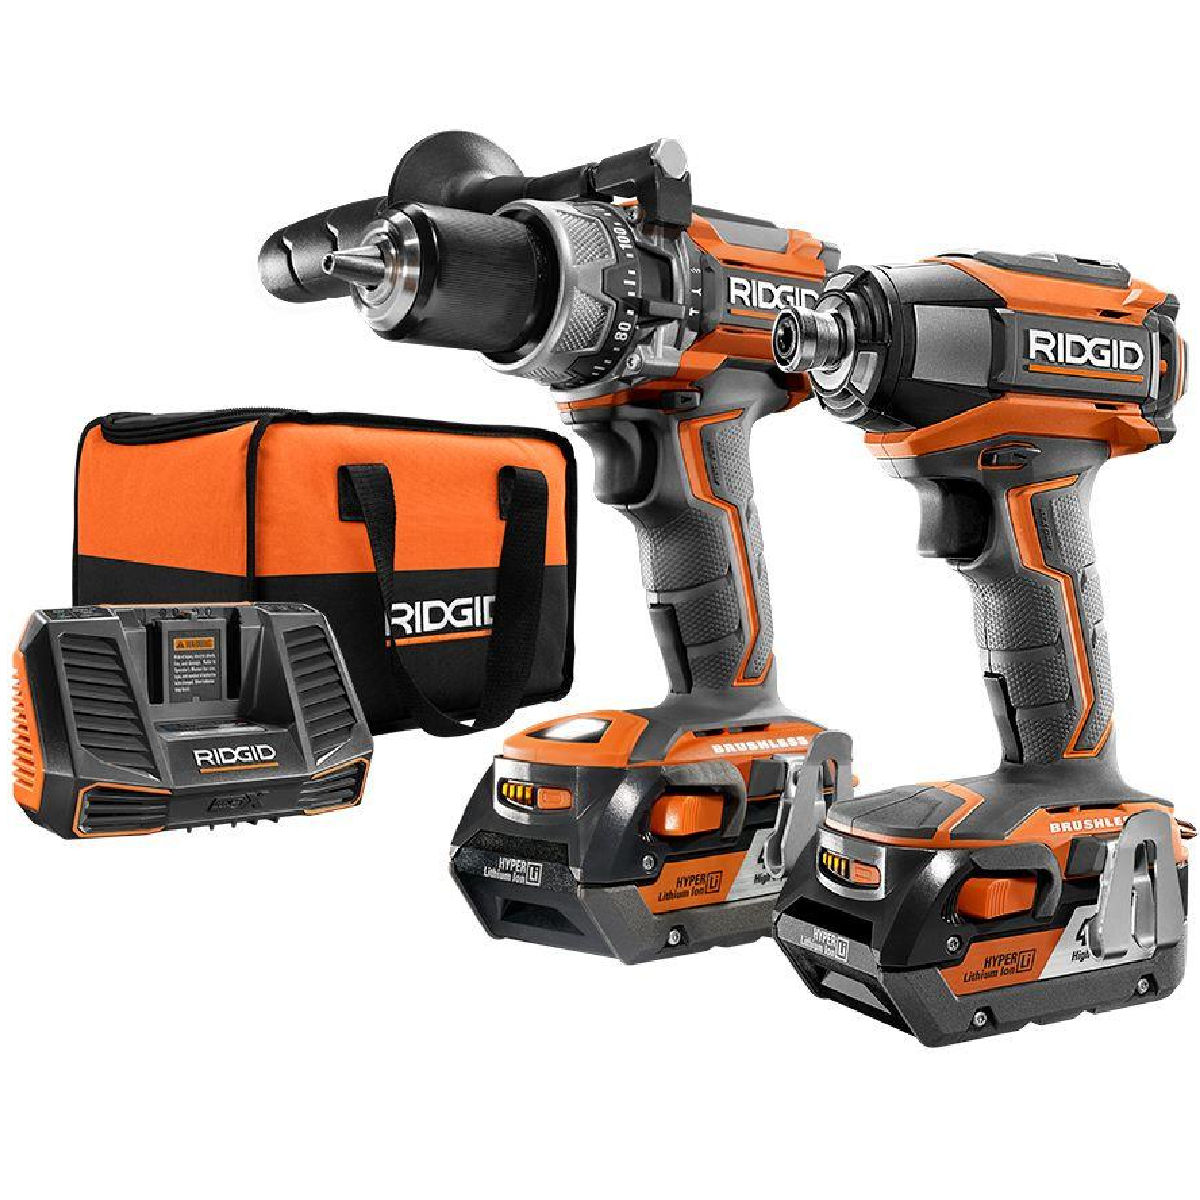 RIDGID R9205 18-Volt Lithium-Ion Cordless Brushless Hammer Drill and Impact Driver